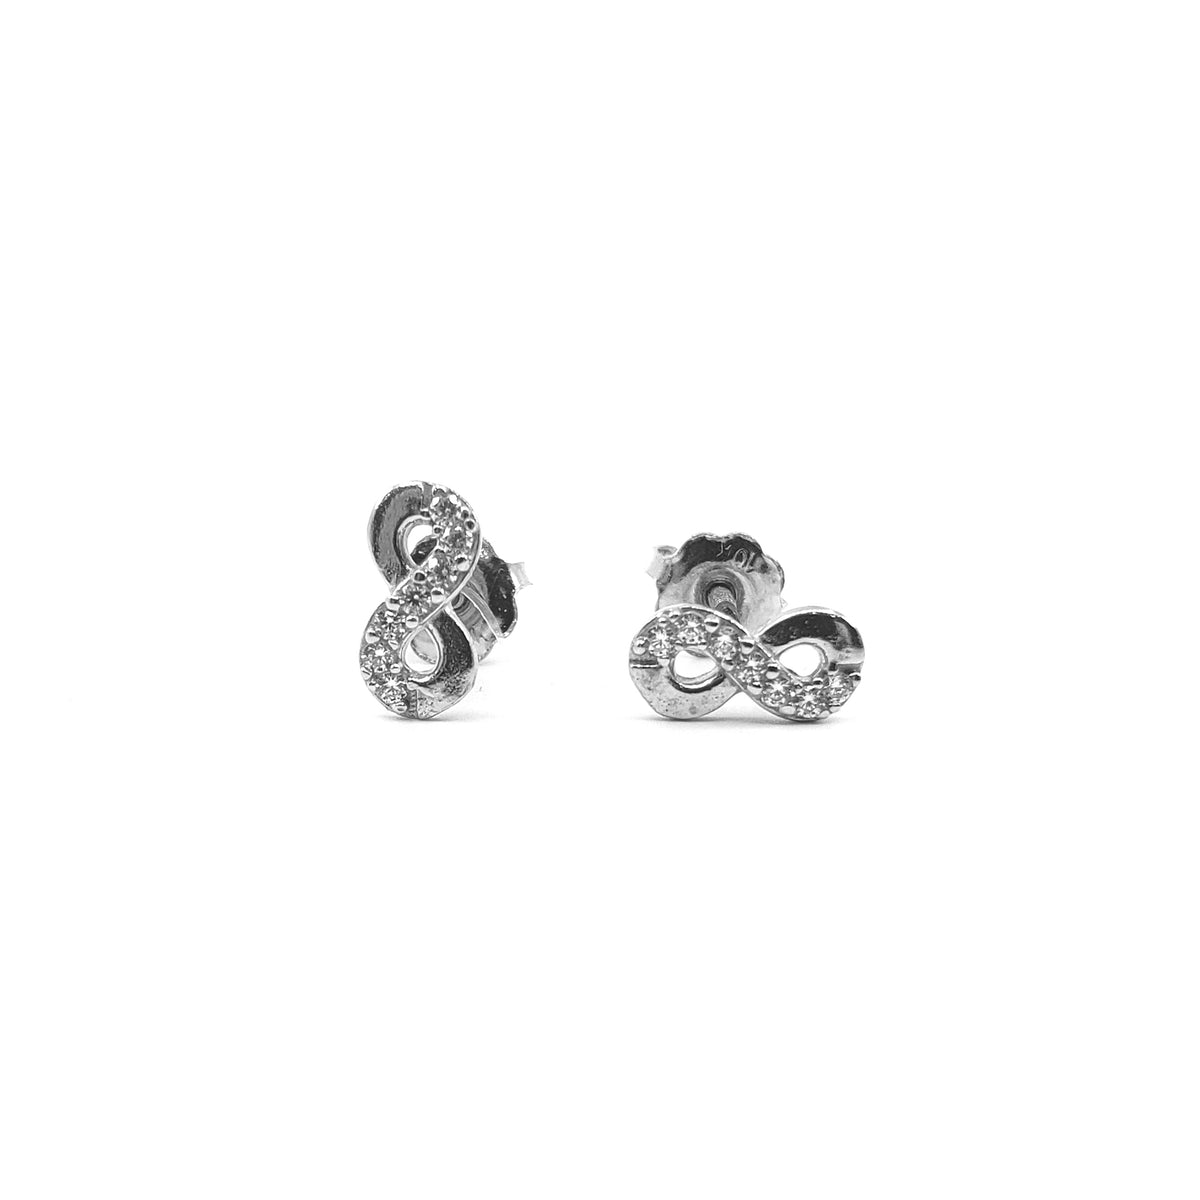 10K White Gold Cubic Zirconia Infinity Studs with Screw Back - 8mm x 3mm